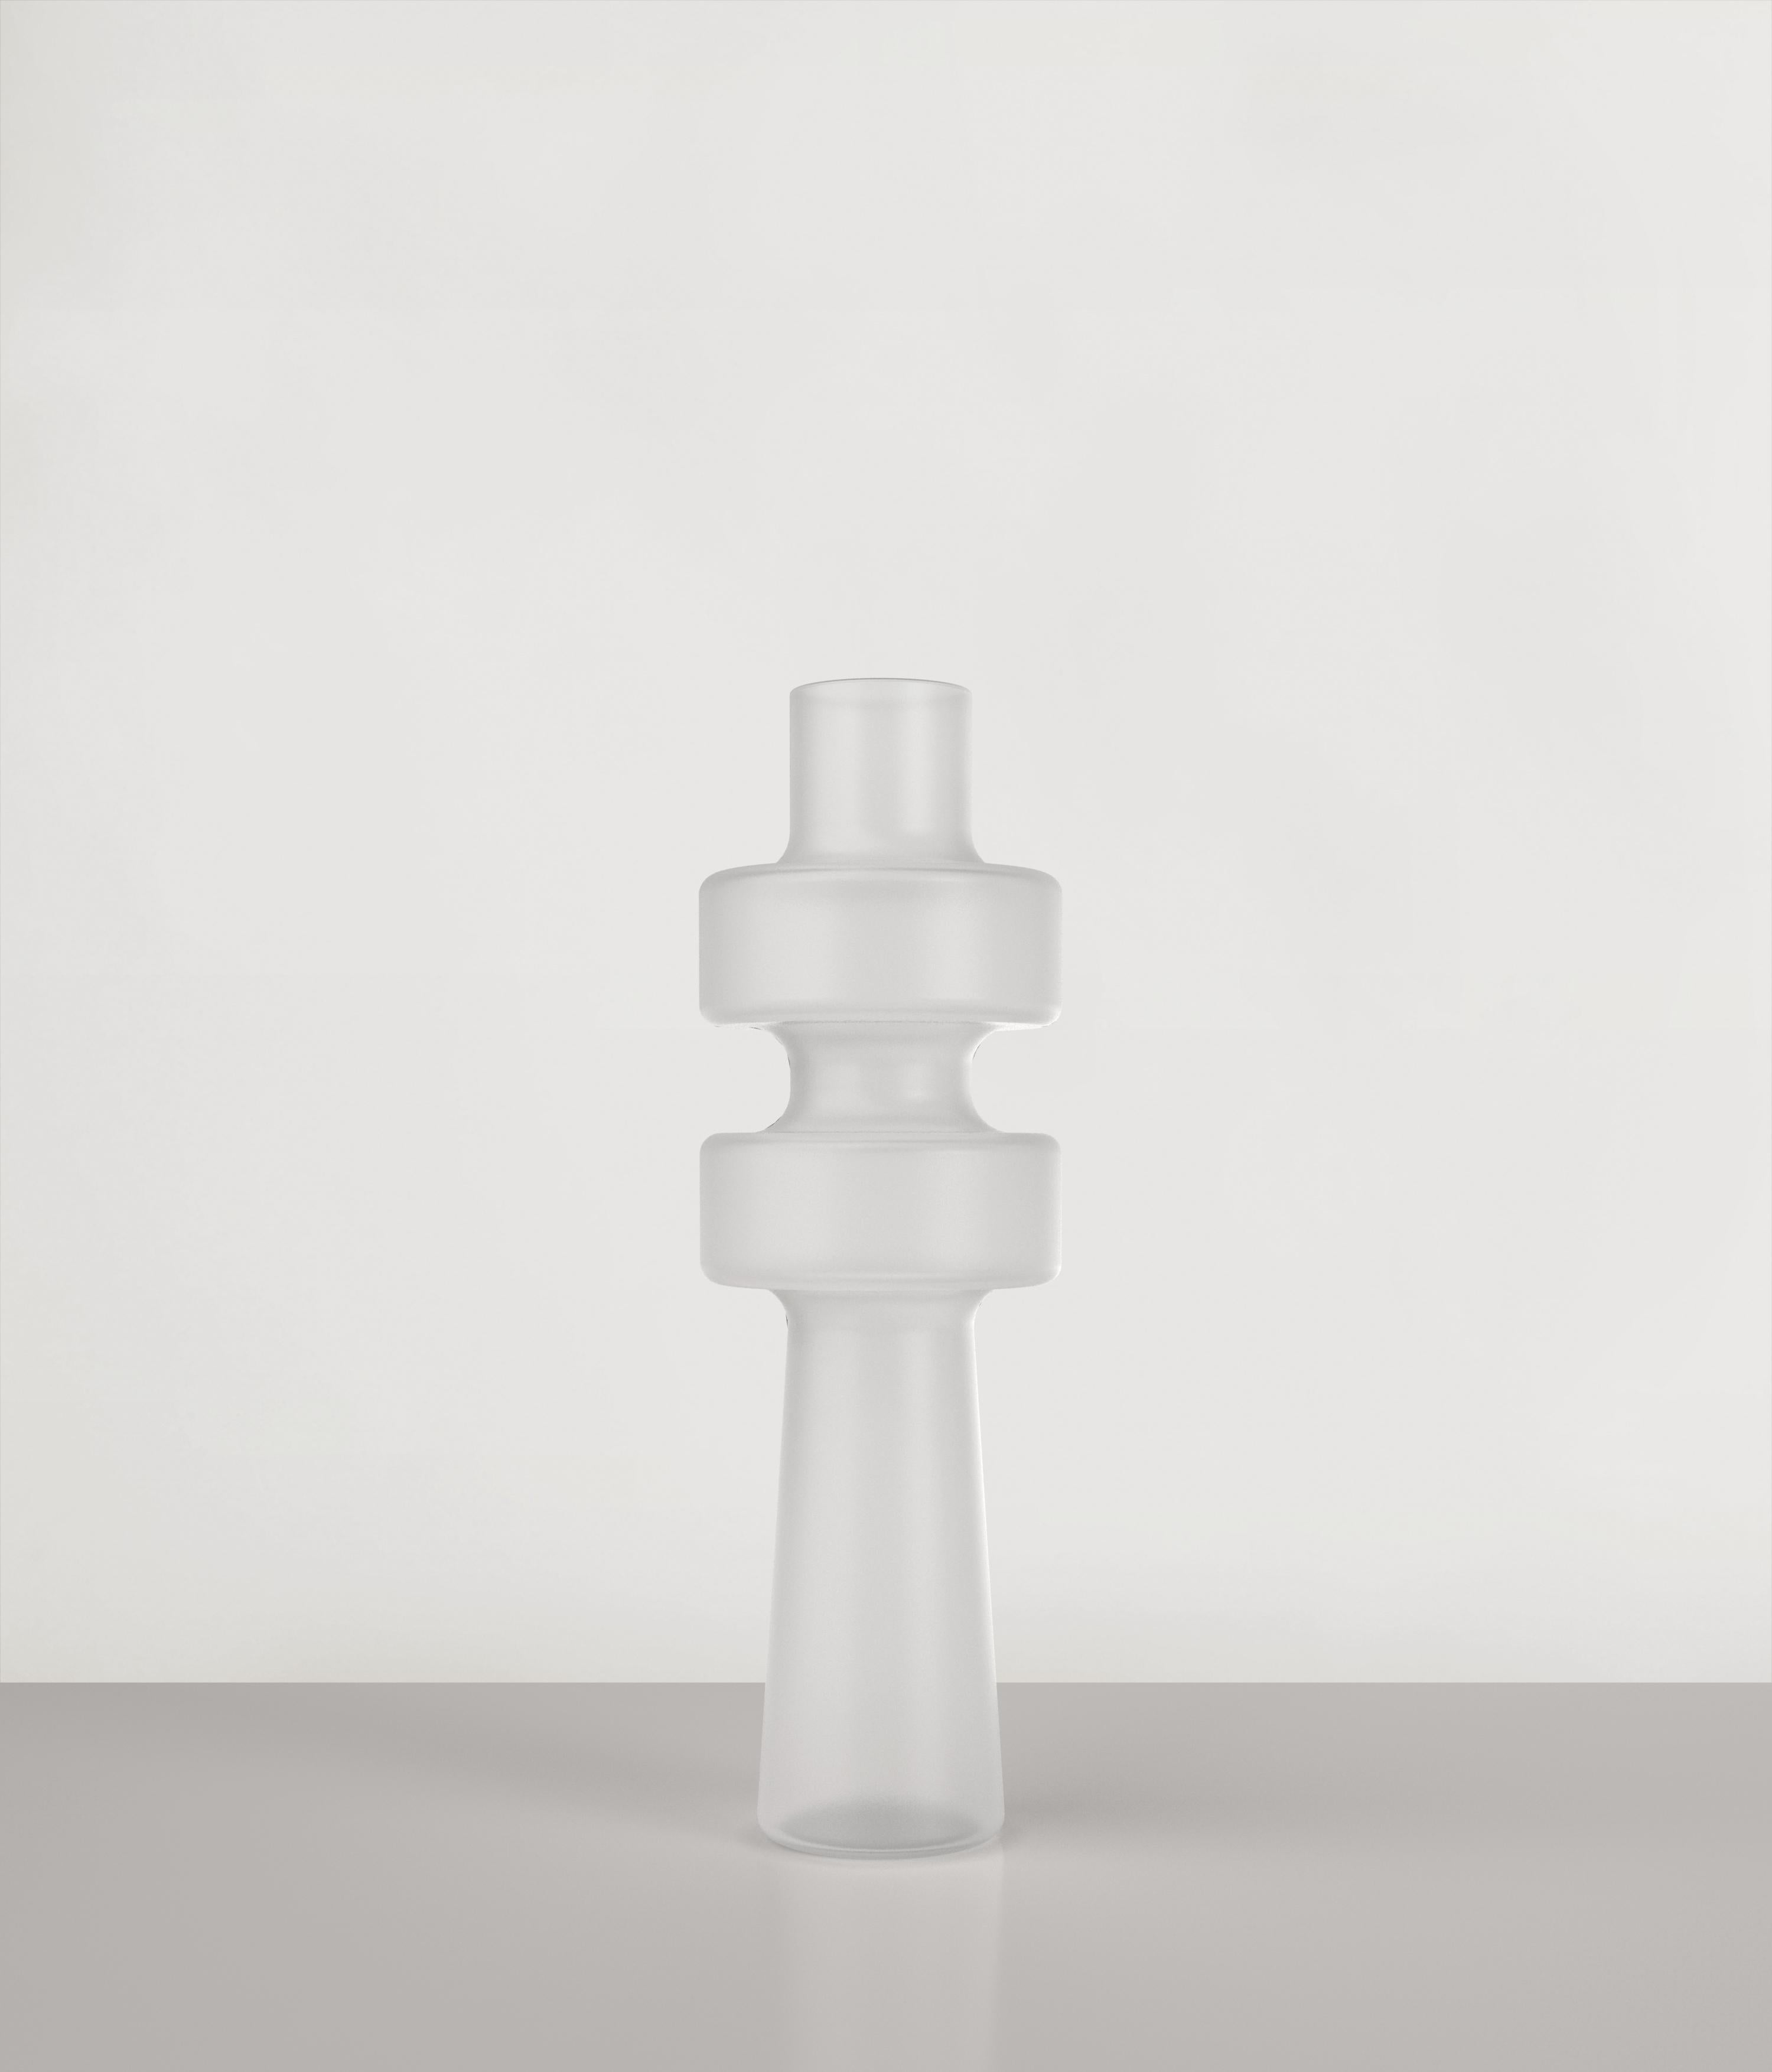 Uppa V1 Vase by Edizione Limitata
Limited Edition of 1000 pieces. Signed and numbered.
Dimensions: D12 x H38 cm
Materials: Sanded Glass

Uppa is a series of 21st Century sculptural vases made by Italian artisans in blown sanded glass. The piece is